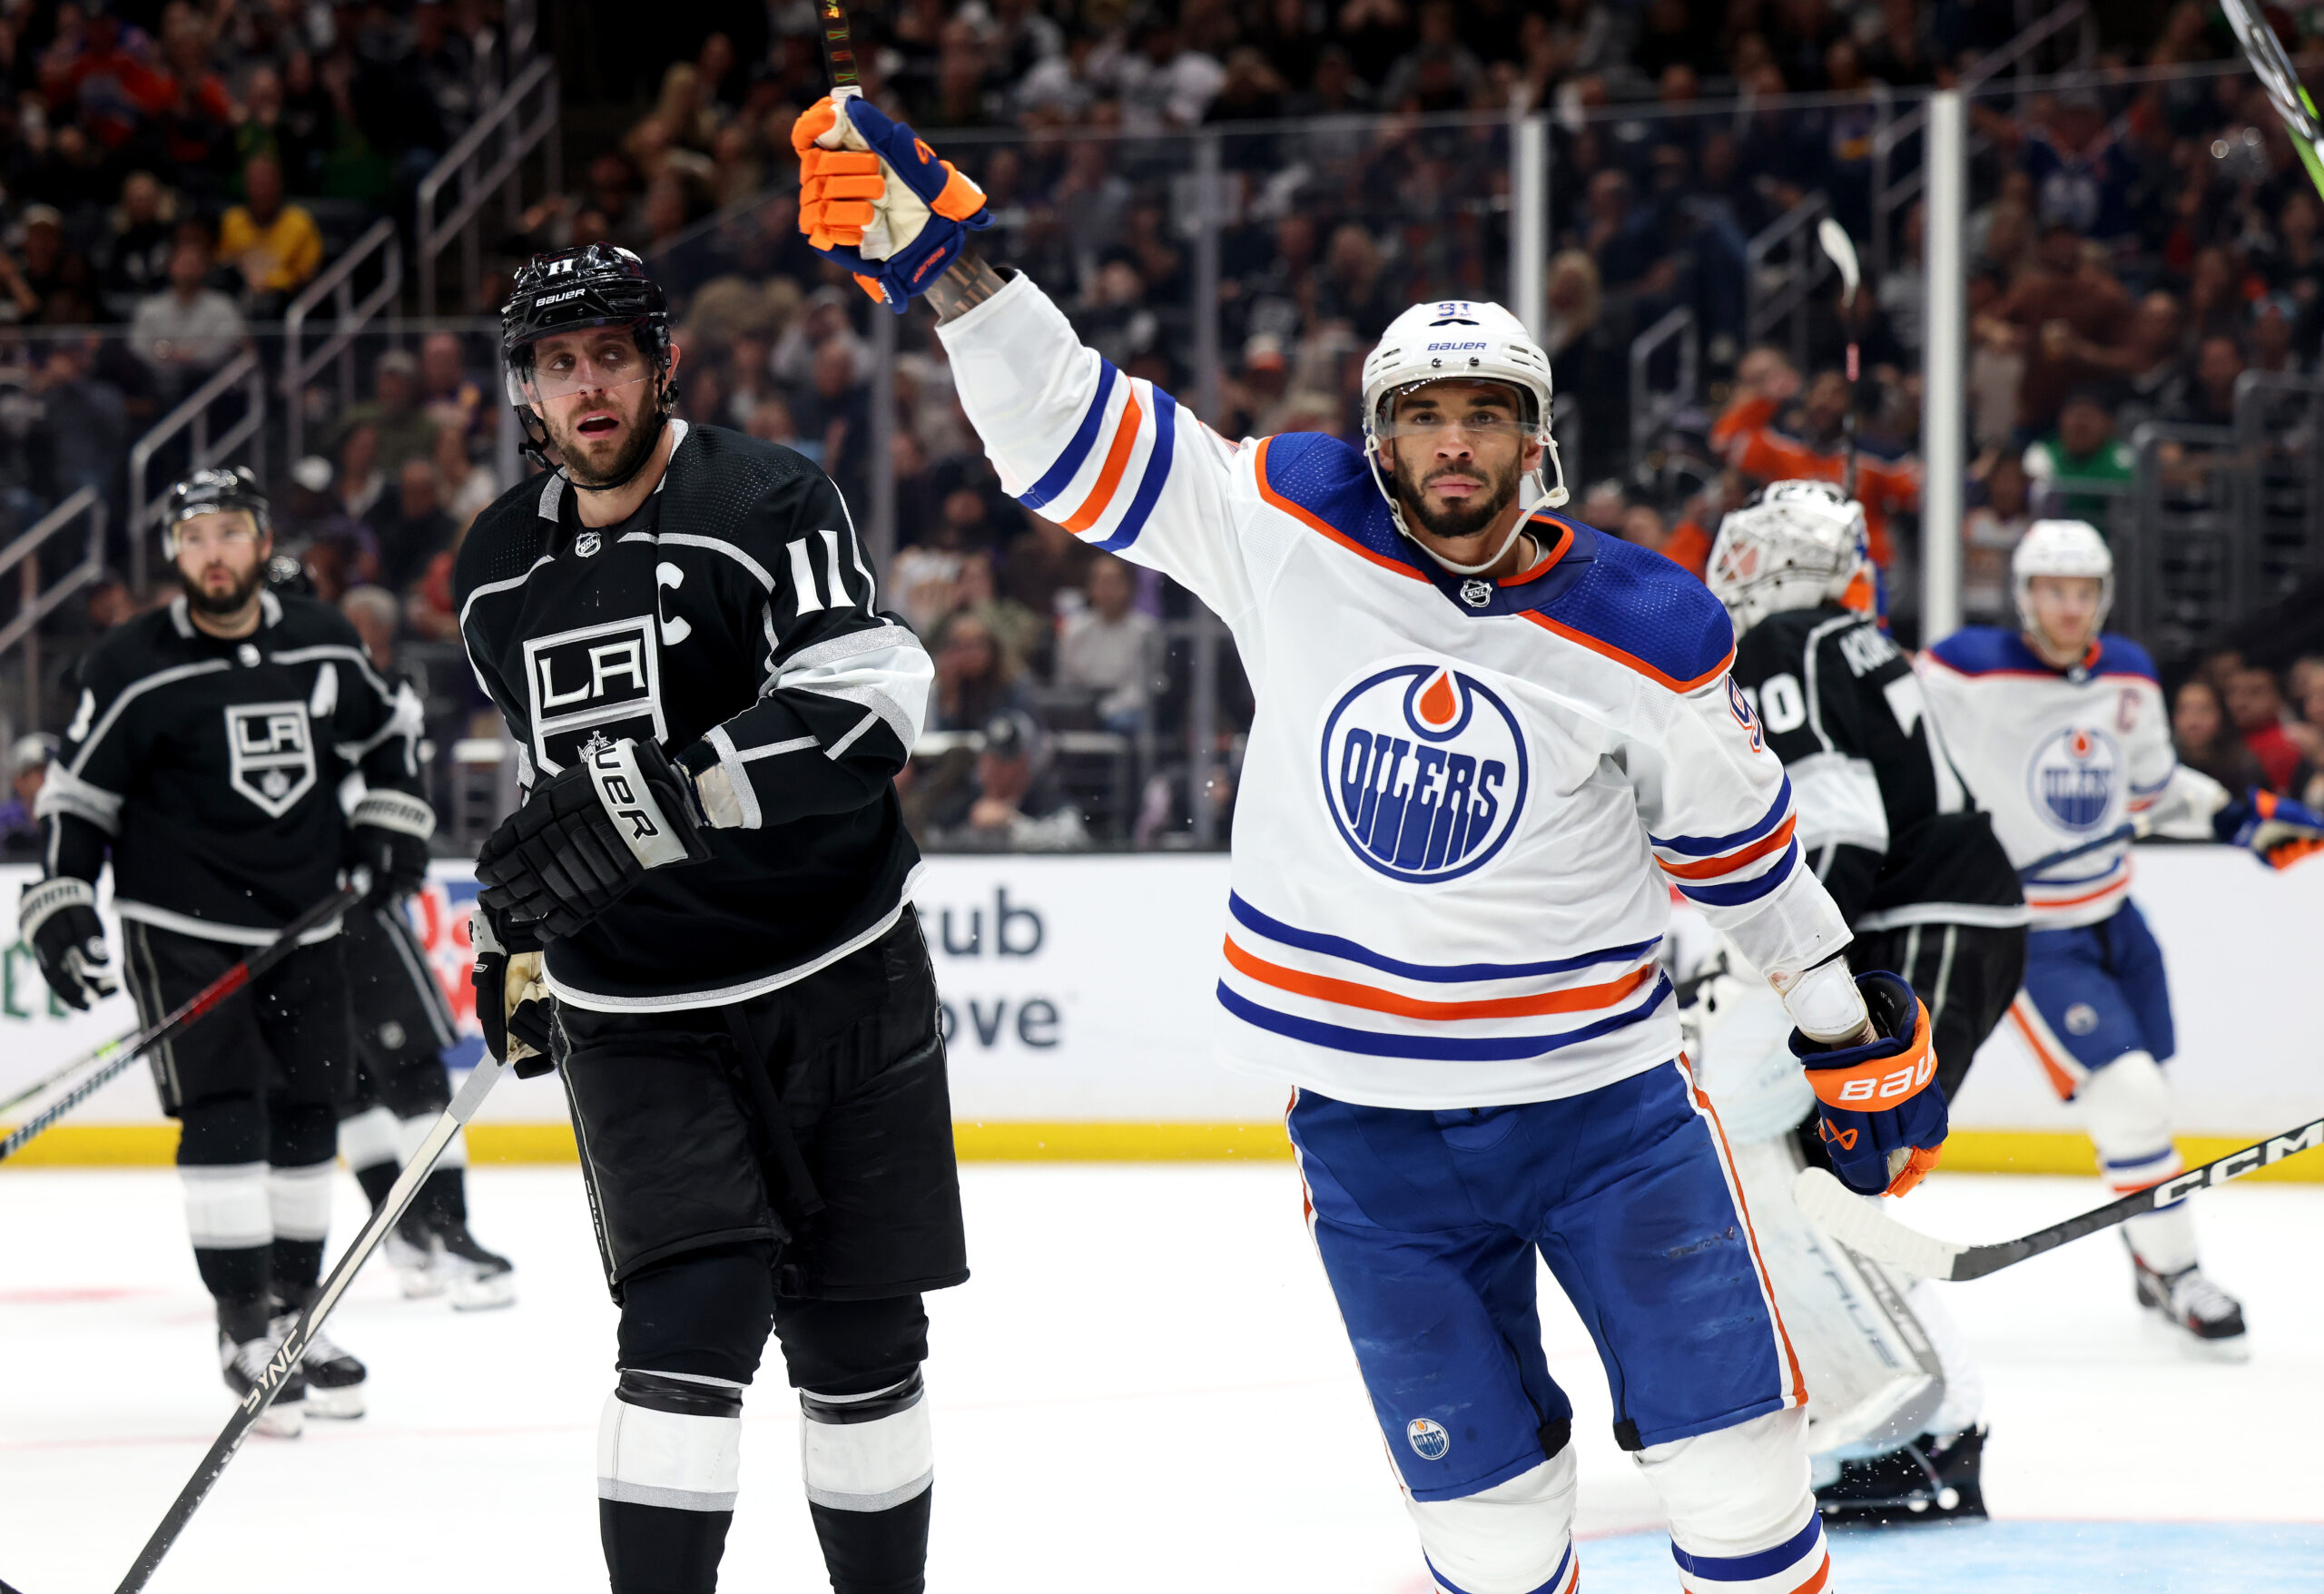 Oilers vs. Kings Playoffs Preview: Skinner Apology, Gagner & Holloway, Matchup Intensity